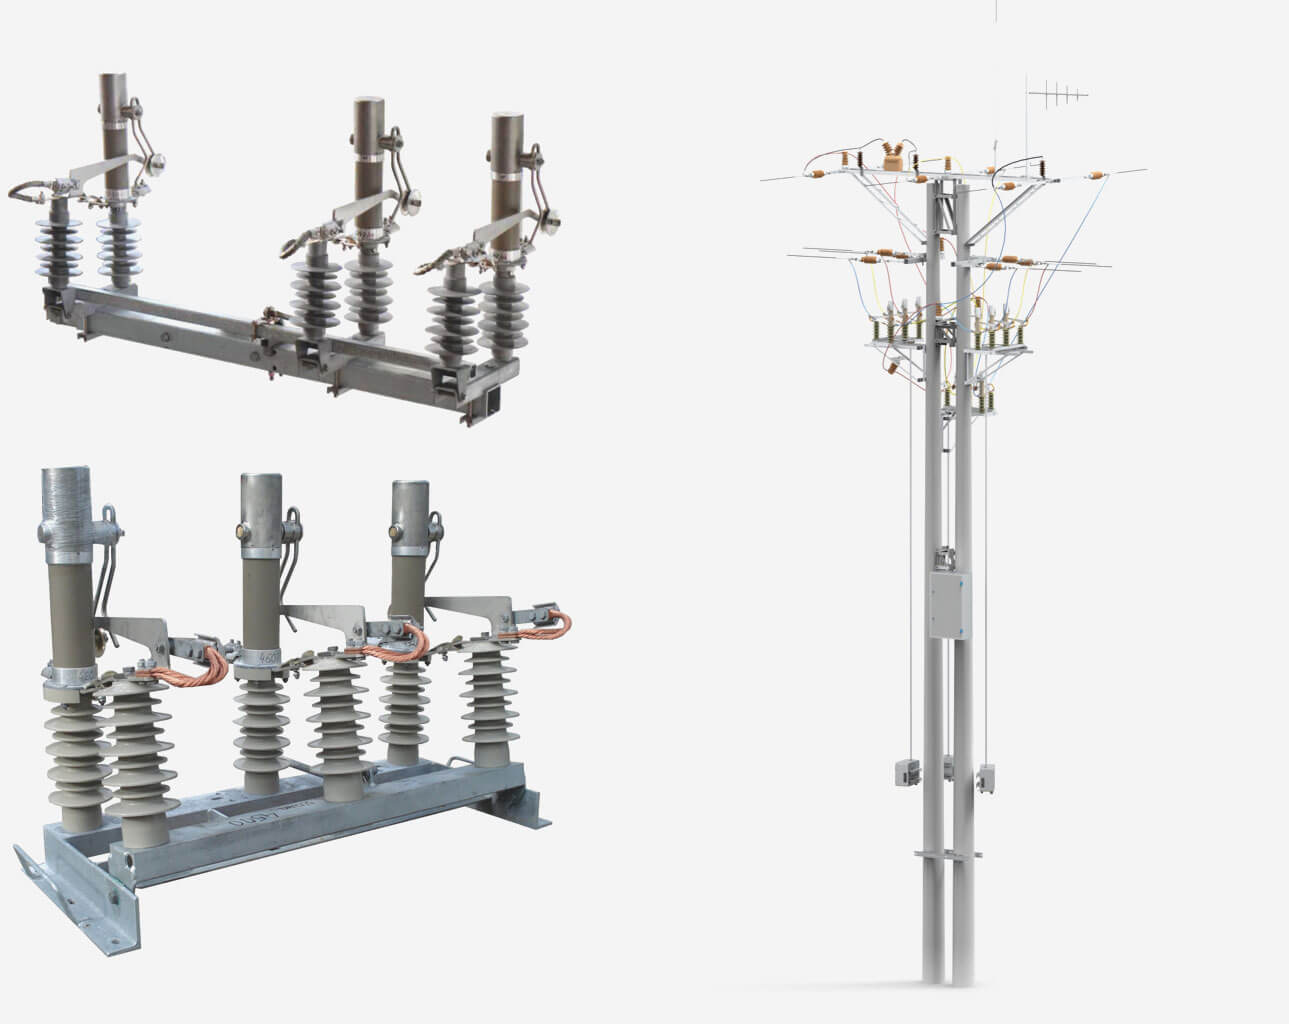 RPN Switch disconnectors with vacuum interrupters for the Smart Grid